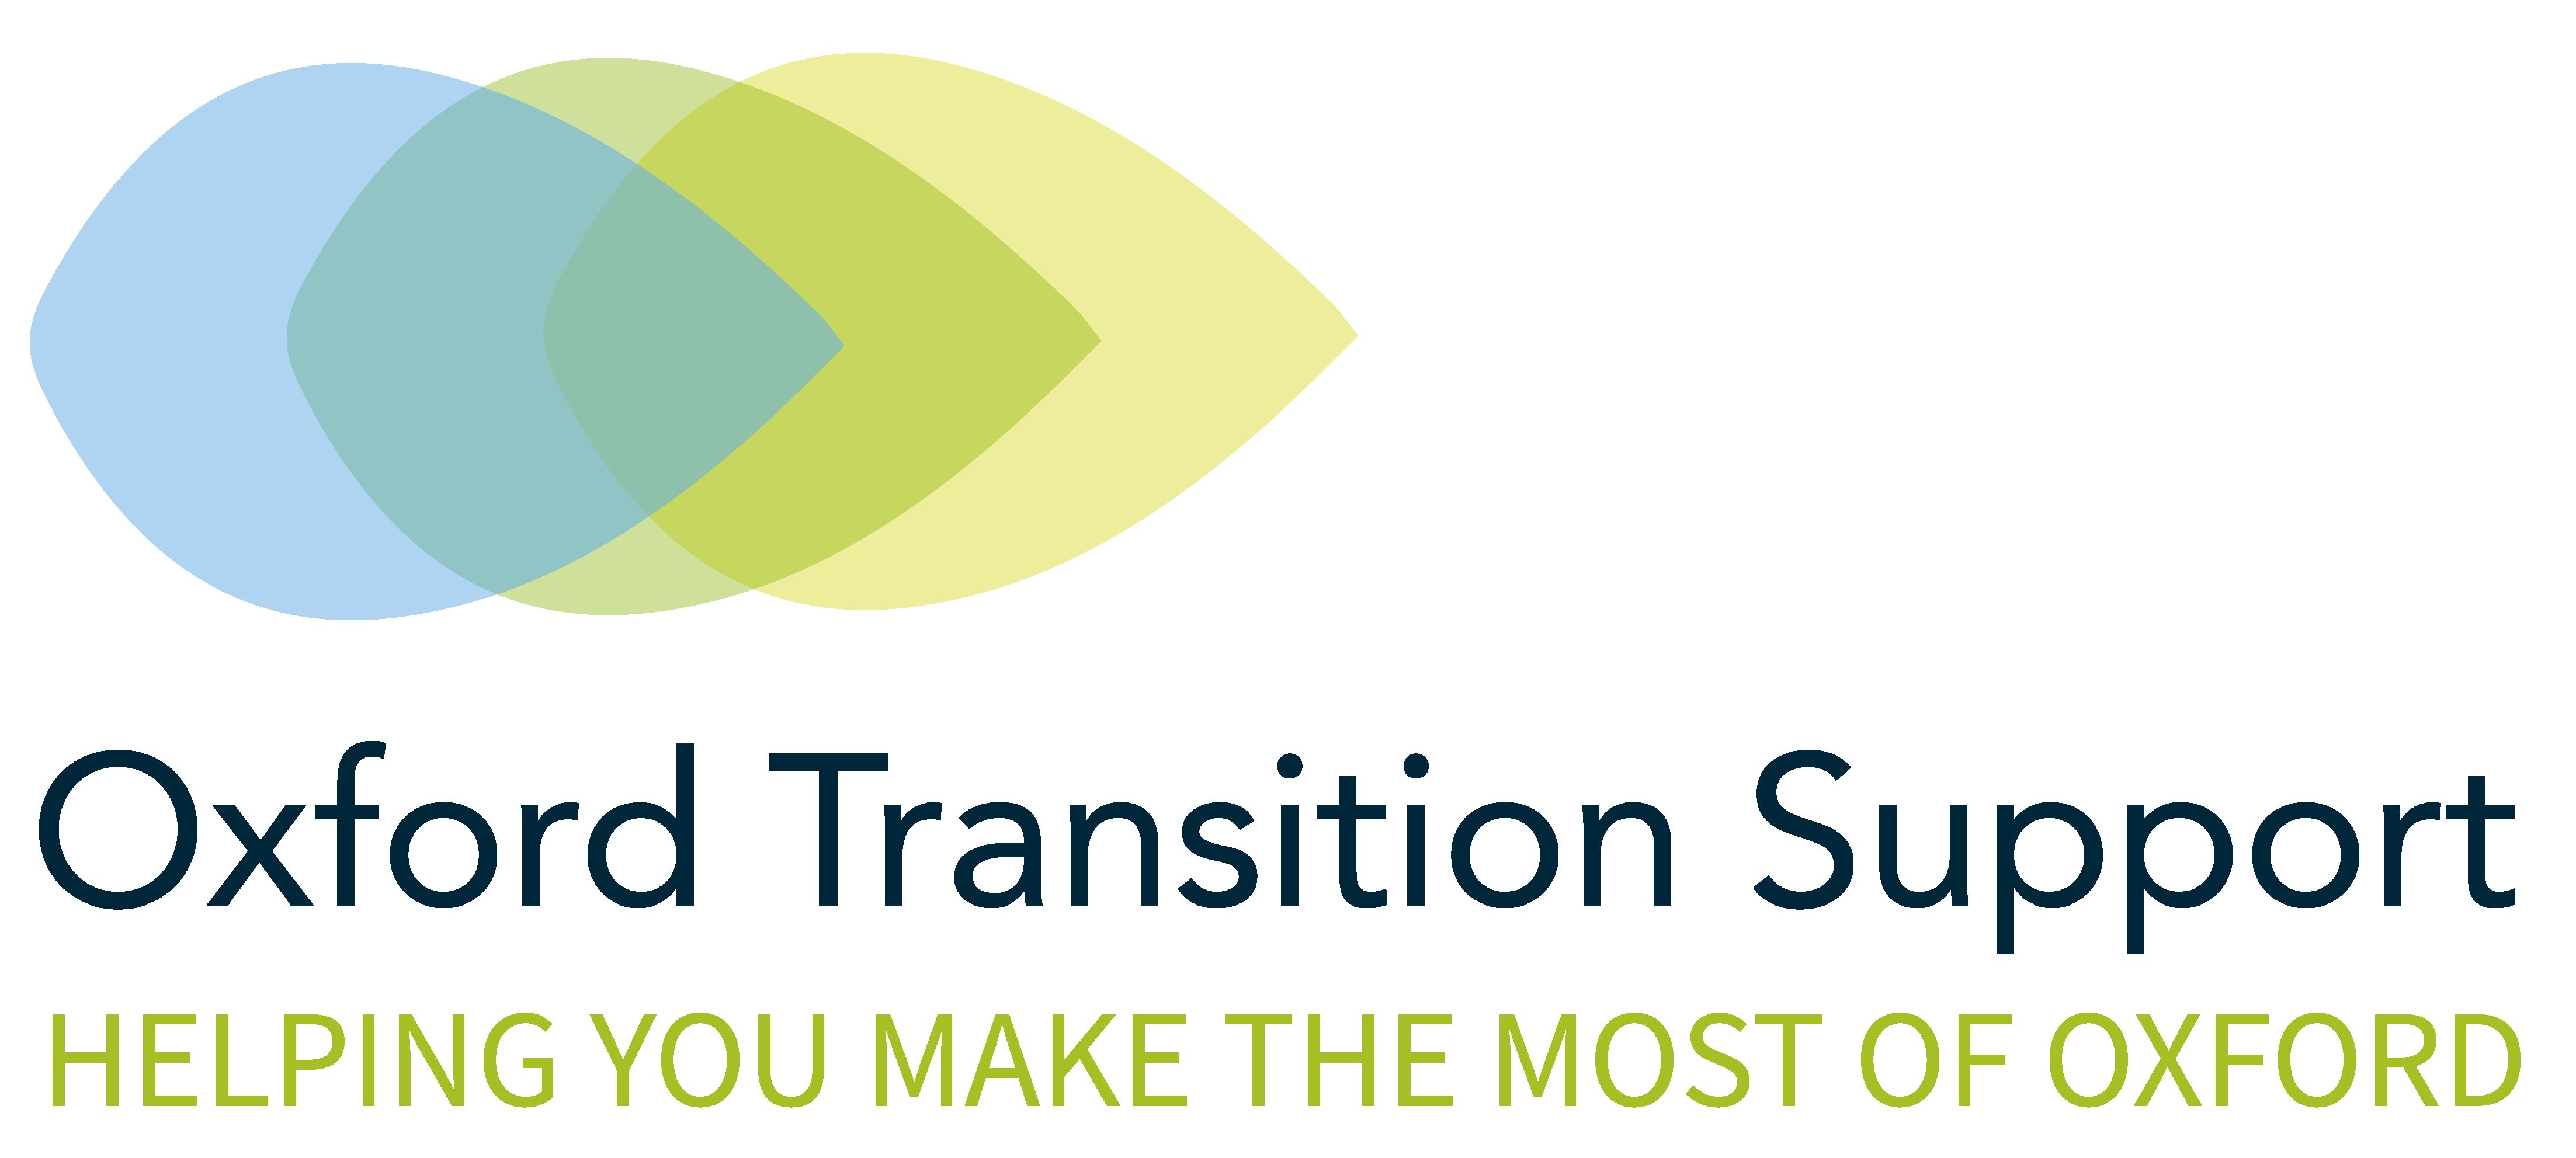 Oxford Transition Support logo